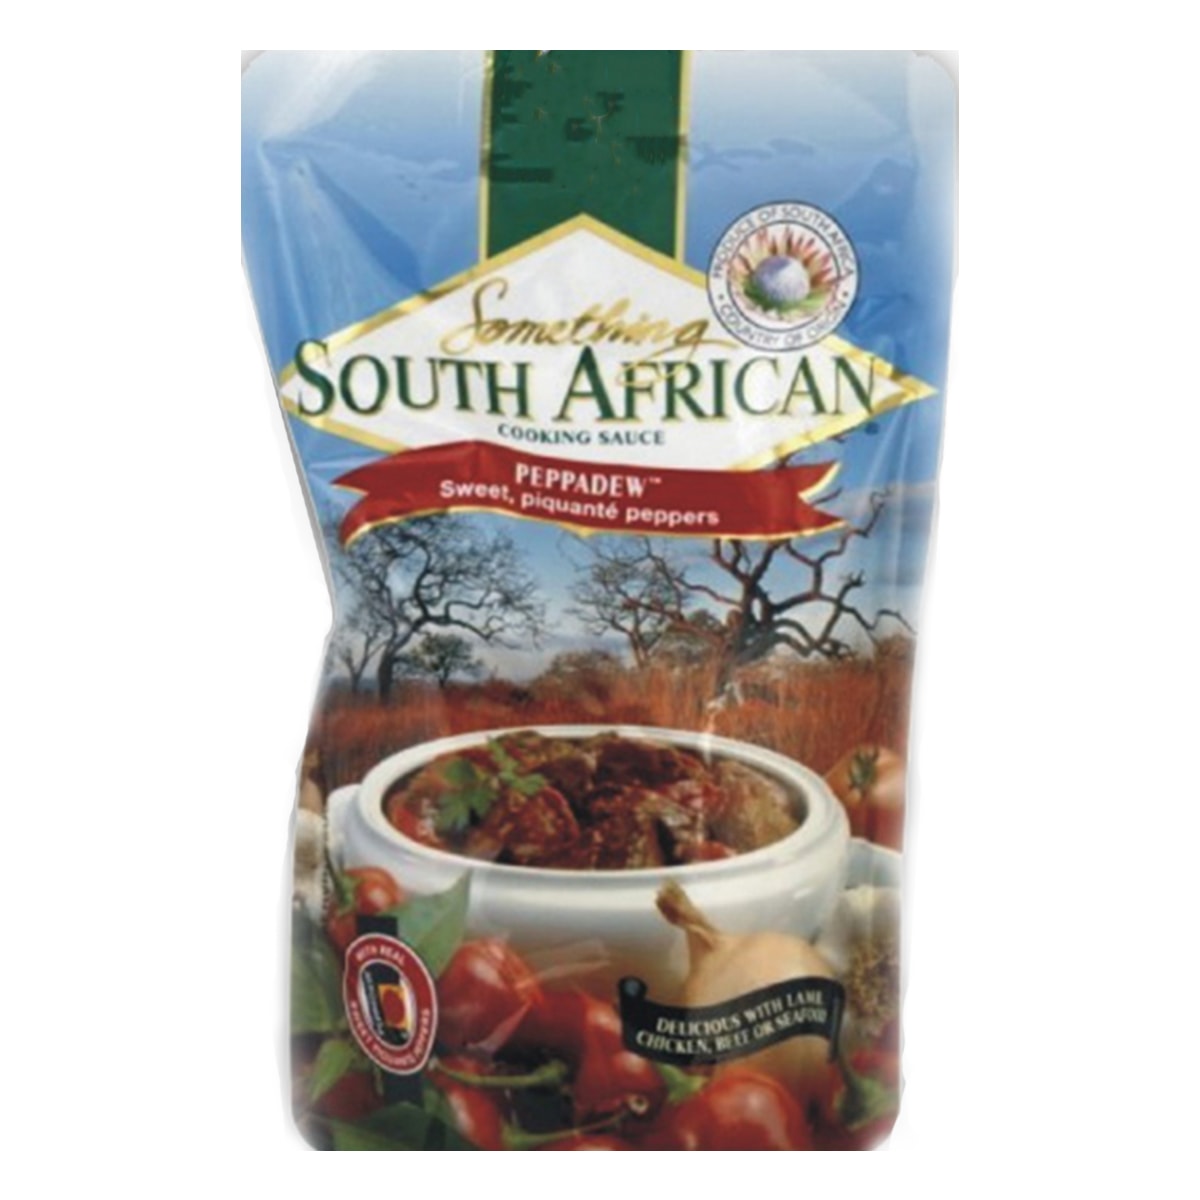 Buy Something South African Peppadew Curry Cooking Sauce - 475 ml